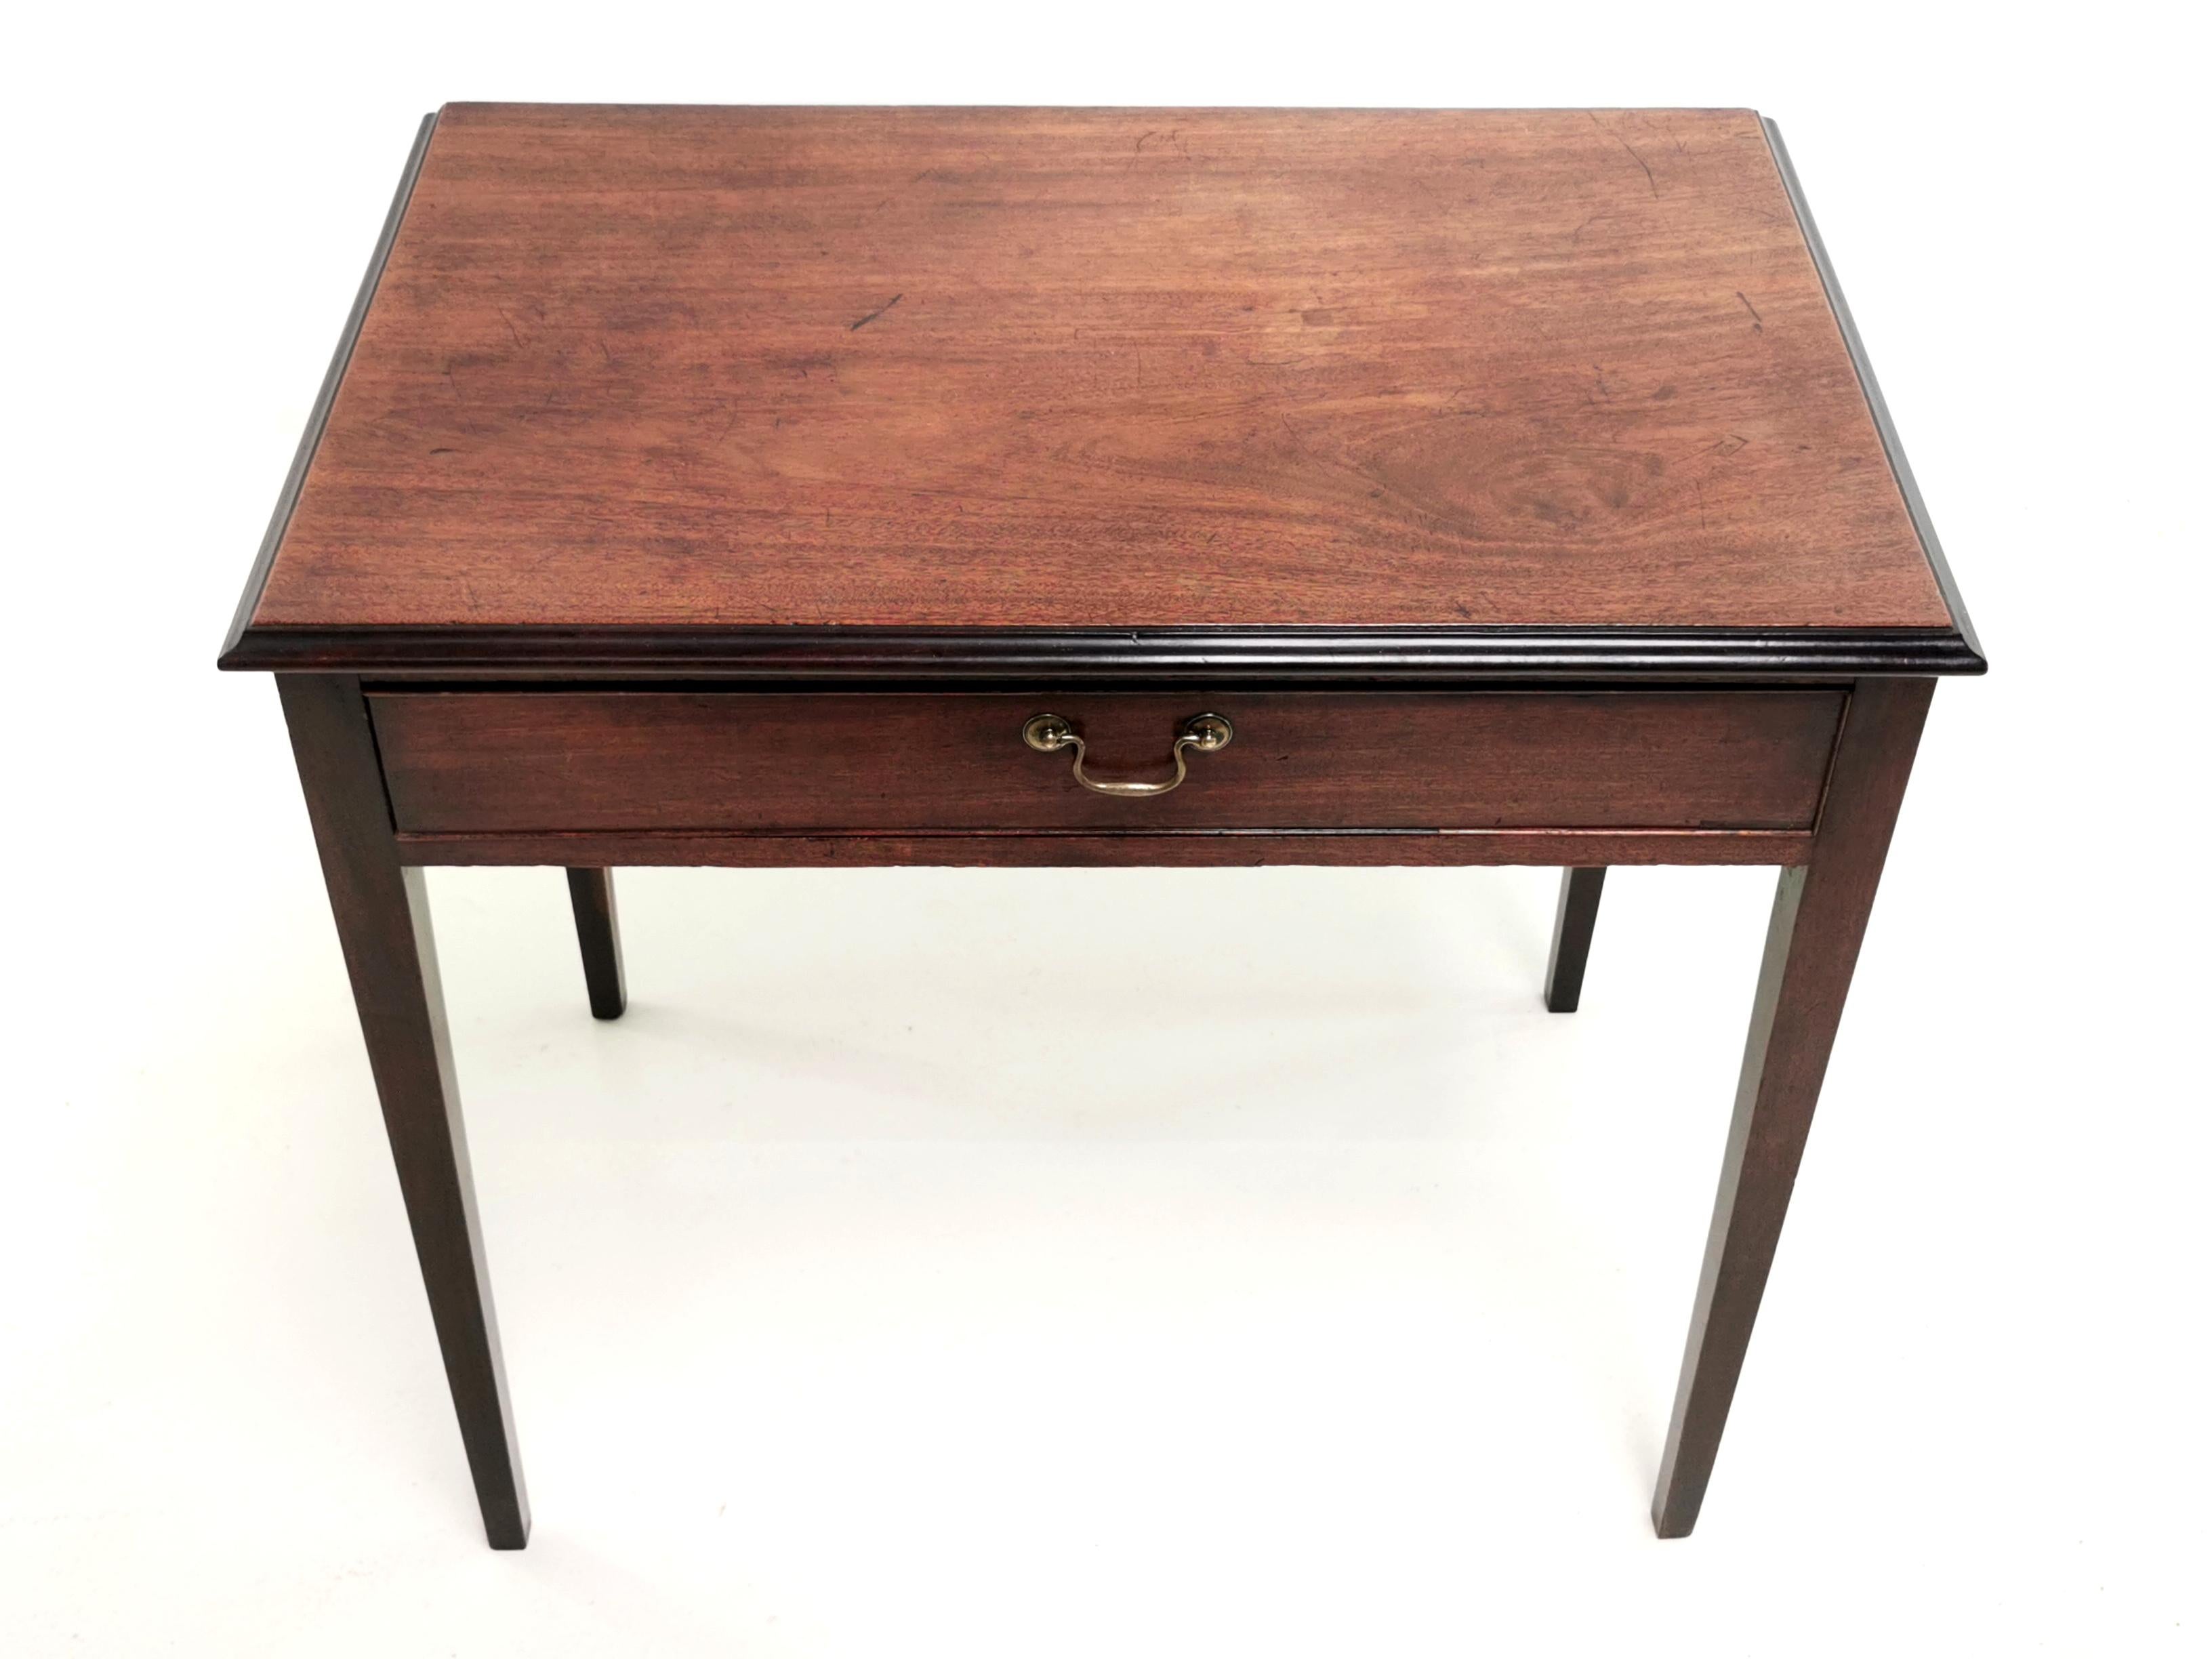 19th century Georgian side table

An early 19th century mahogany side table with a single drawer with cockbeaded borders, raised on square section tapering supports.

Ideal as a writing desk.

Dimensions (cm):? ?

72 H x 77 W x 50